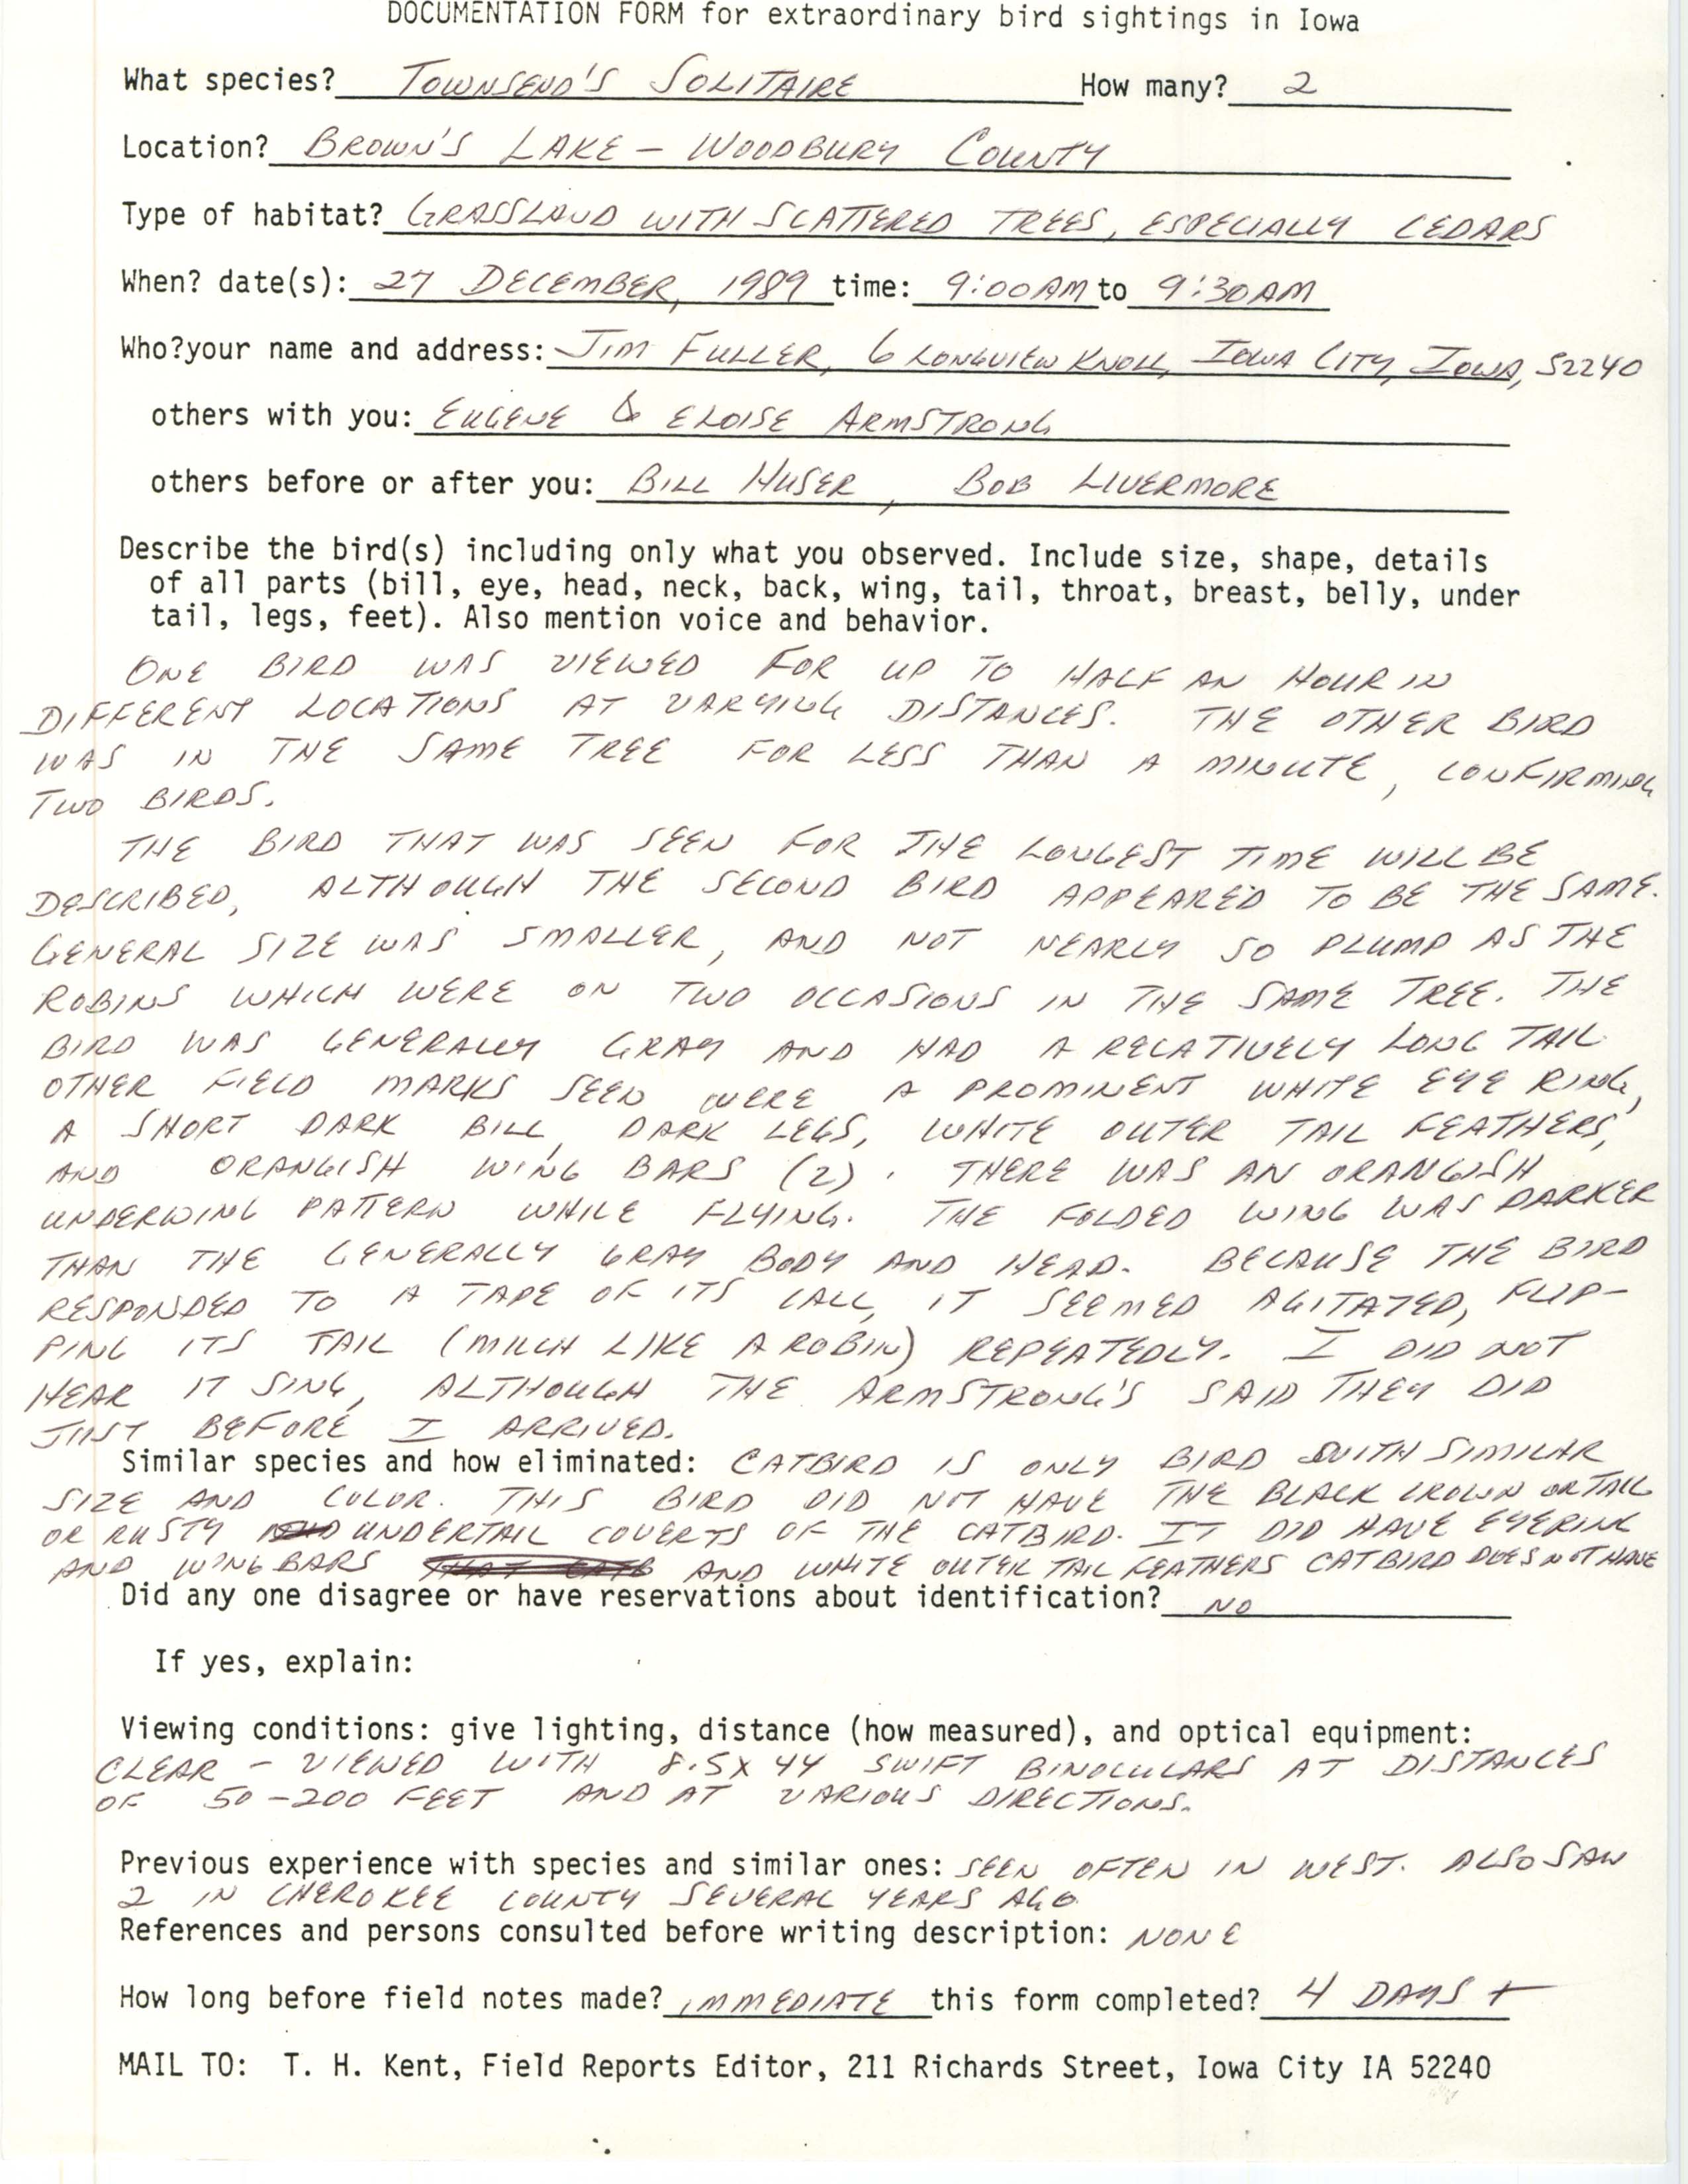 Rare bird documentation form for Townsend's Solitaire at Browns Lake, 1989